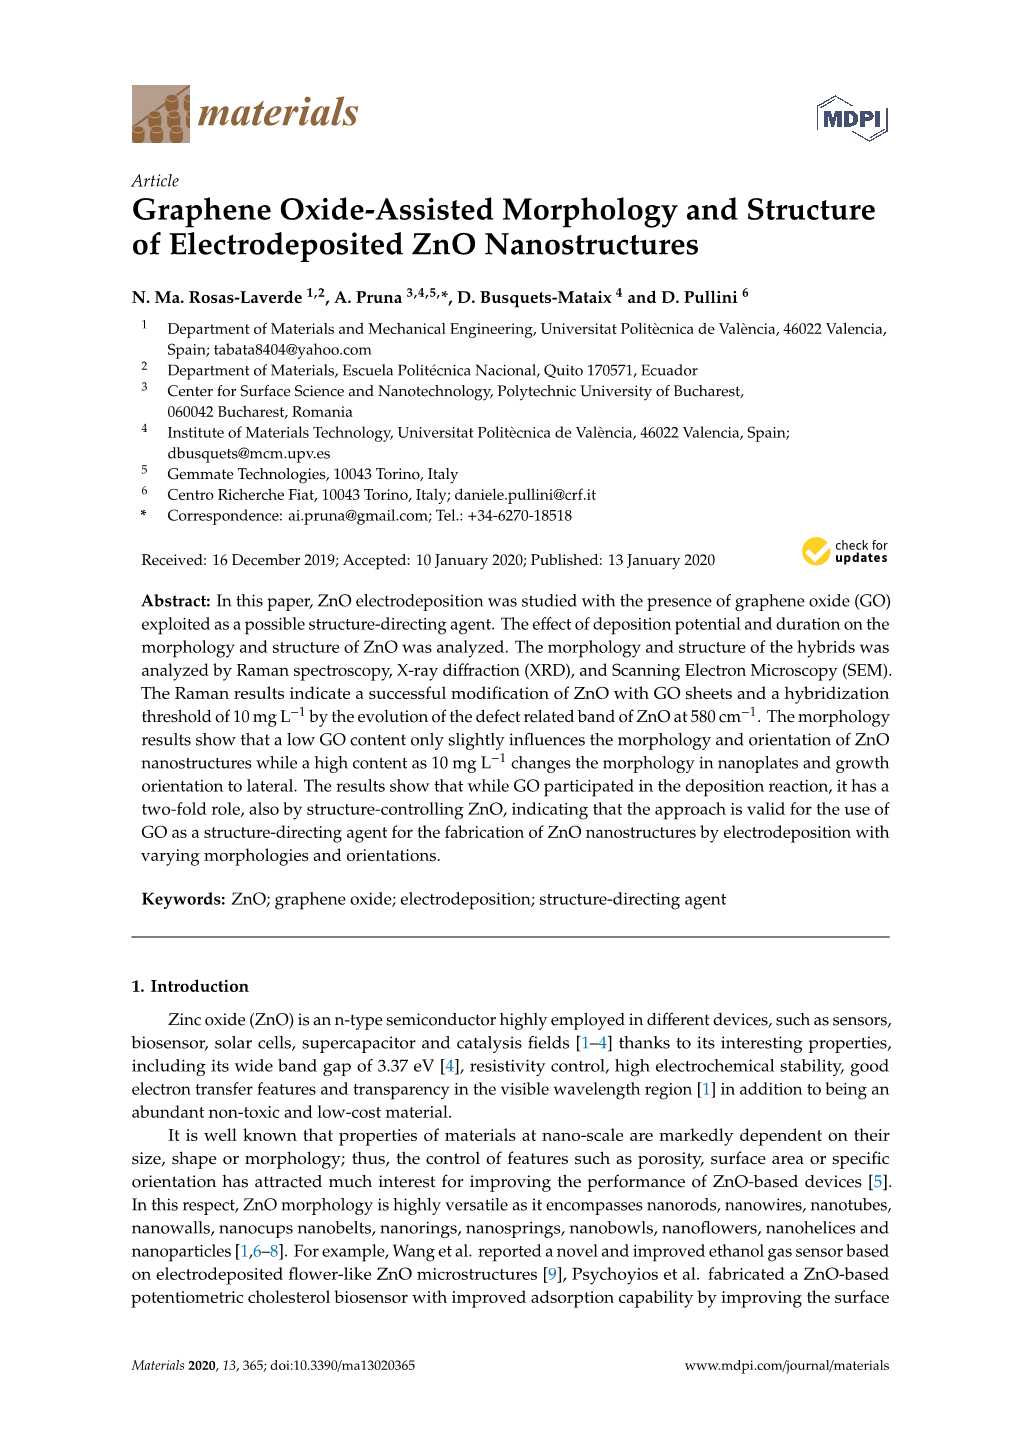 Graphene Oxide-Assisted Morphology and Structure of Electrodeposited Zno Nanostructures